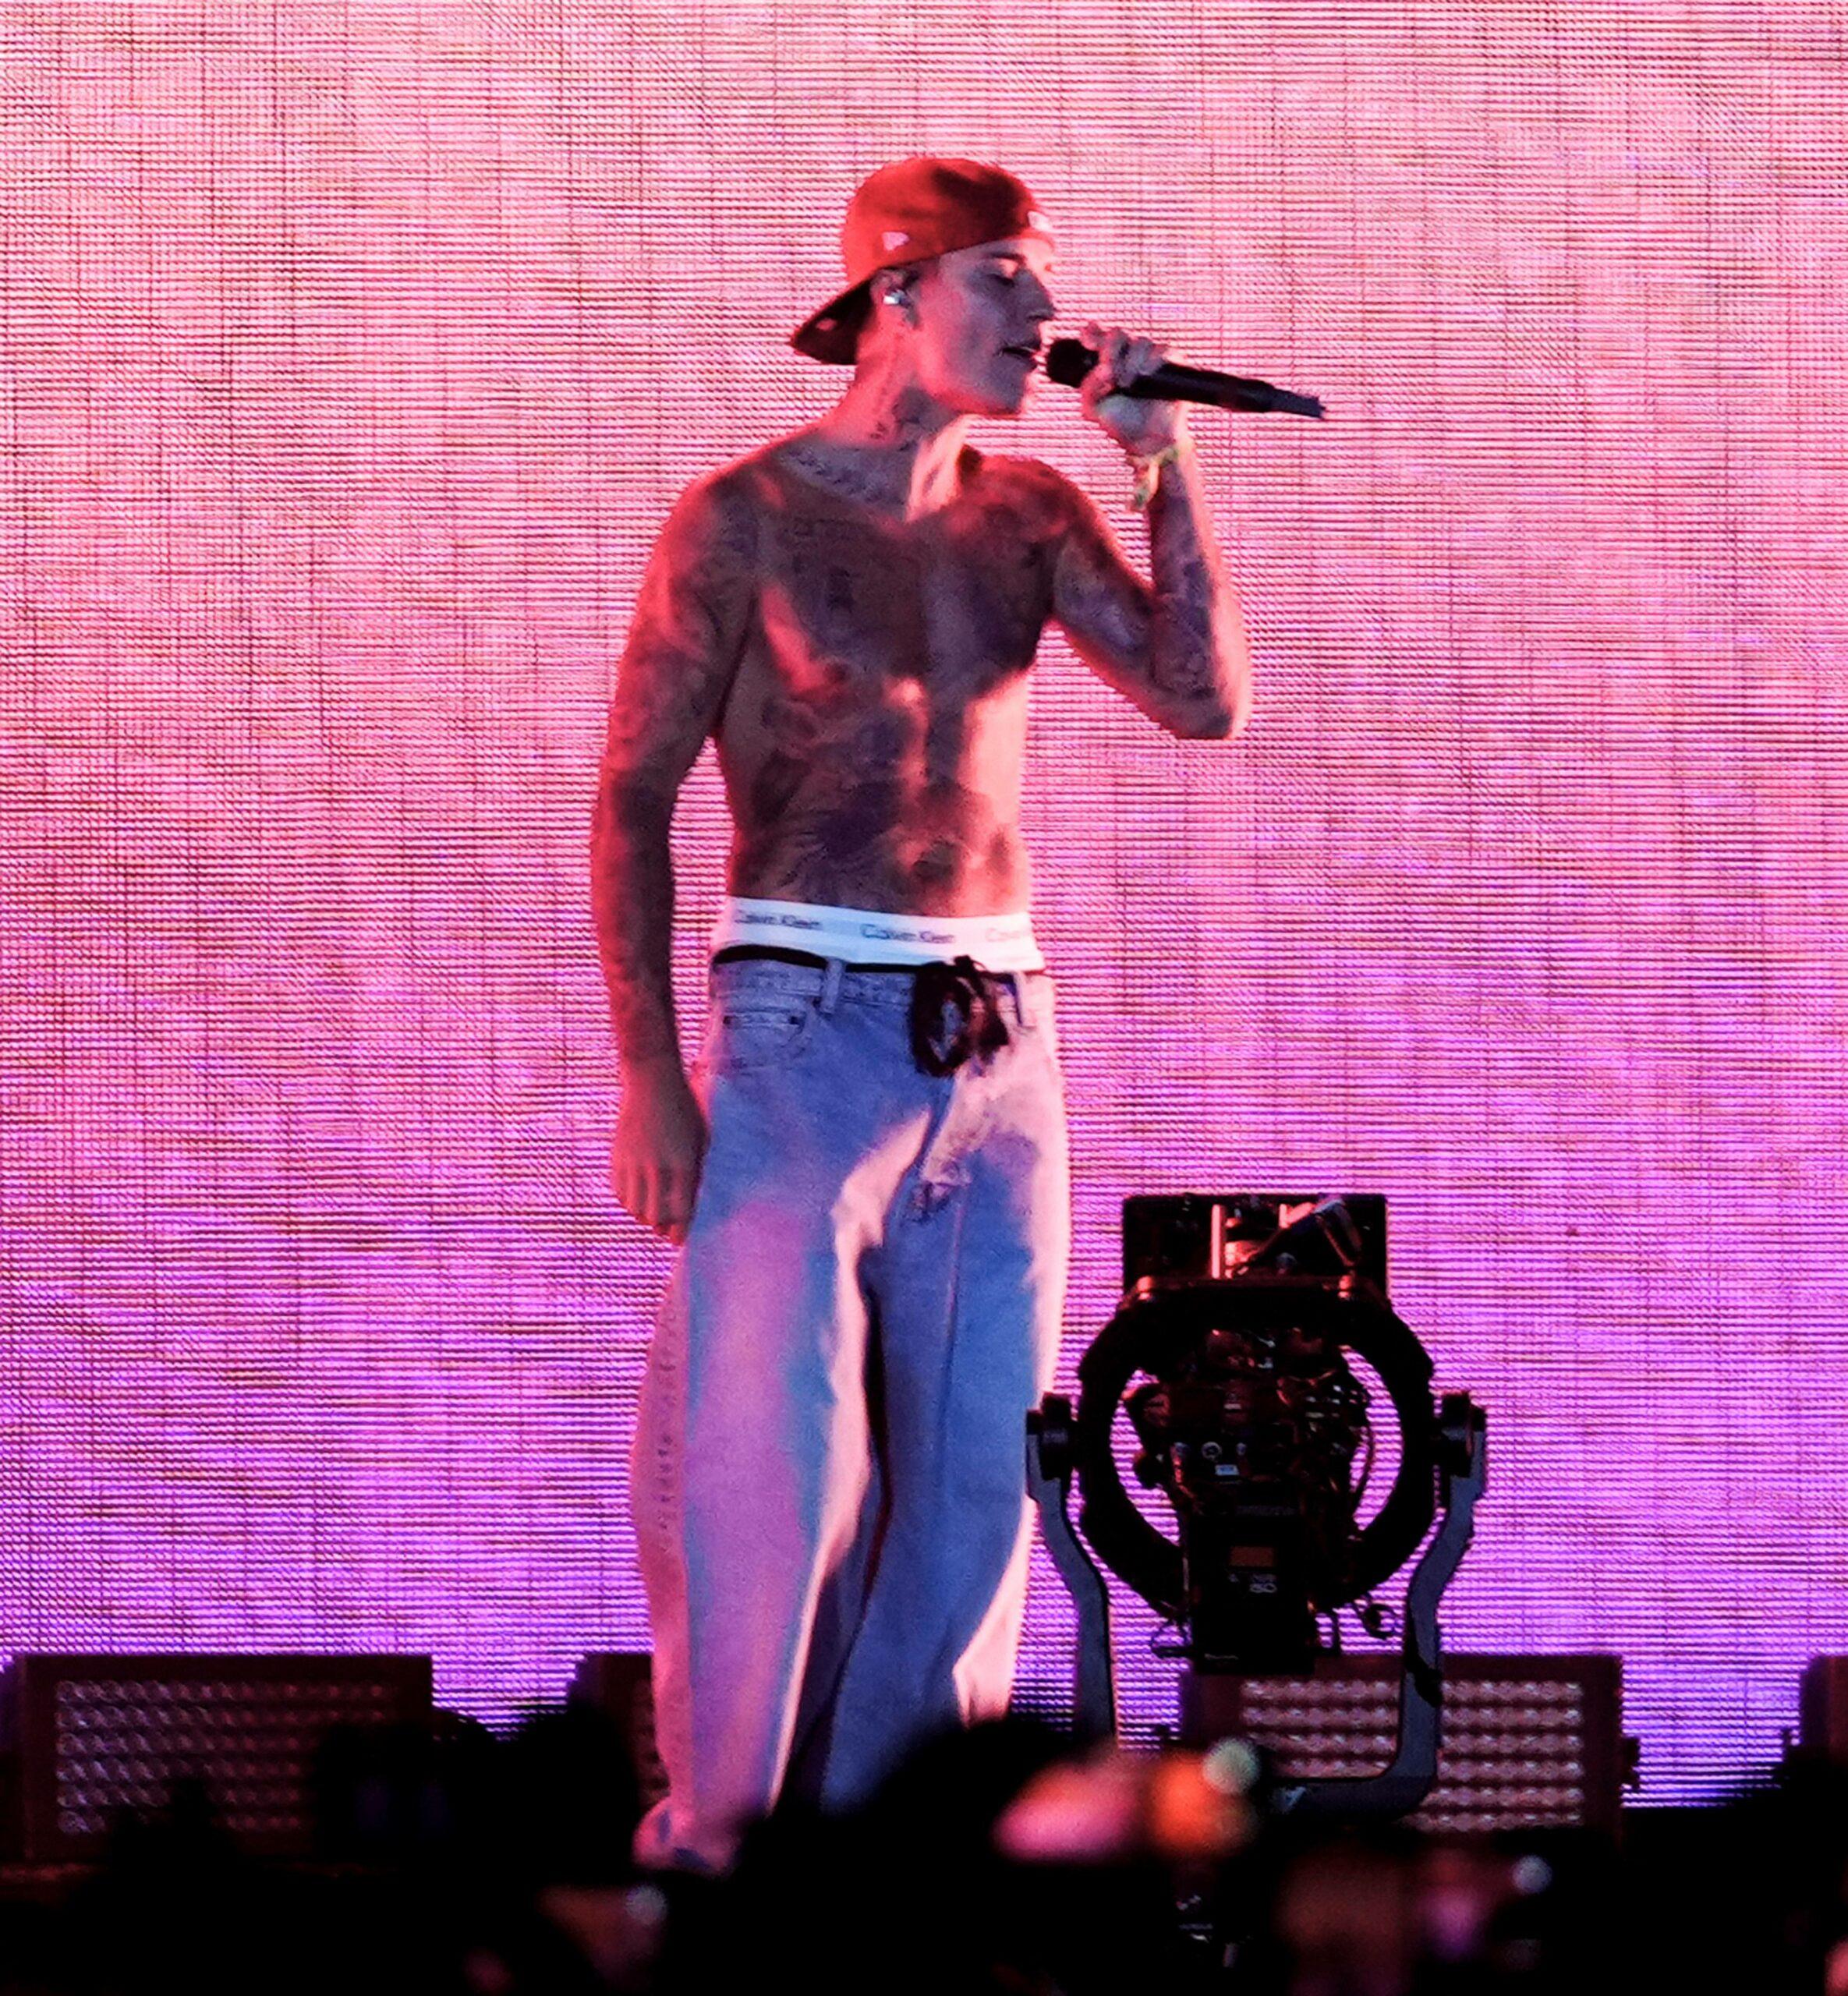 Justin Bieber goes shirtless performing with Justin Ceasar at Coachella Music Festival in Indio, CA